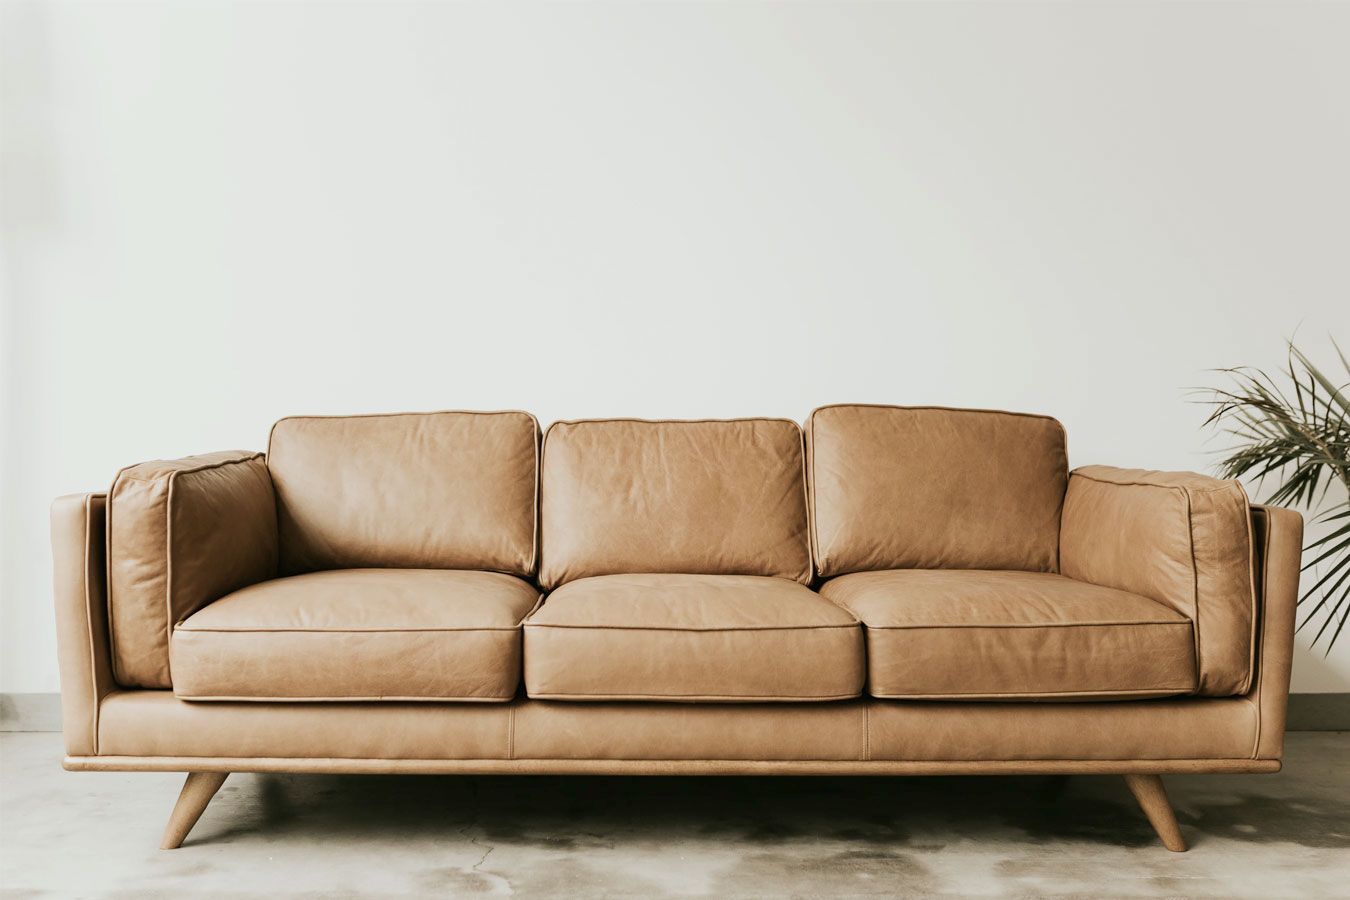 10 Places To Buy A Mid Century Modern Sofa Online Intended For Mid Century Modern Sofas (Gallery 19 of 20)